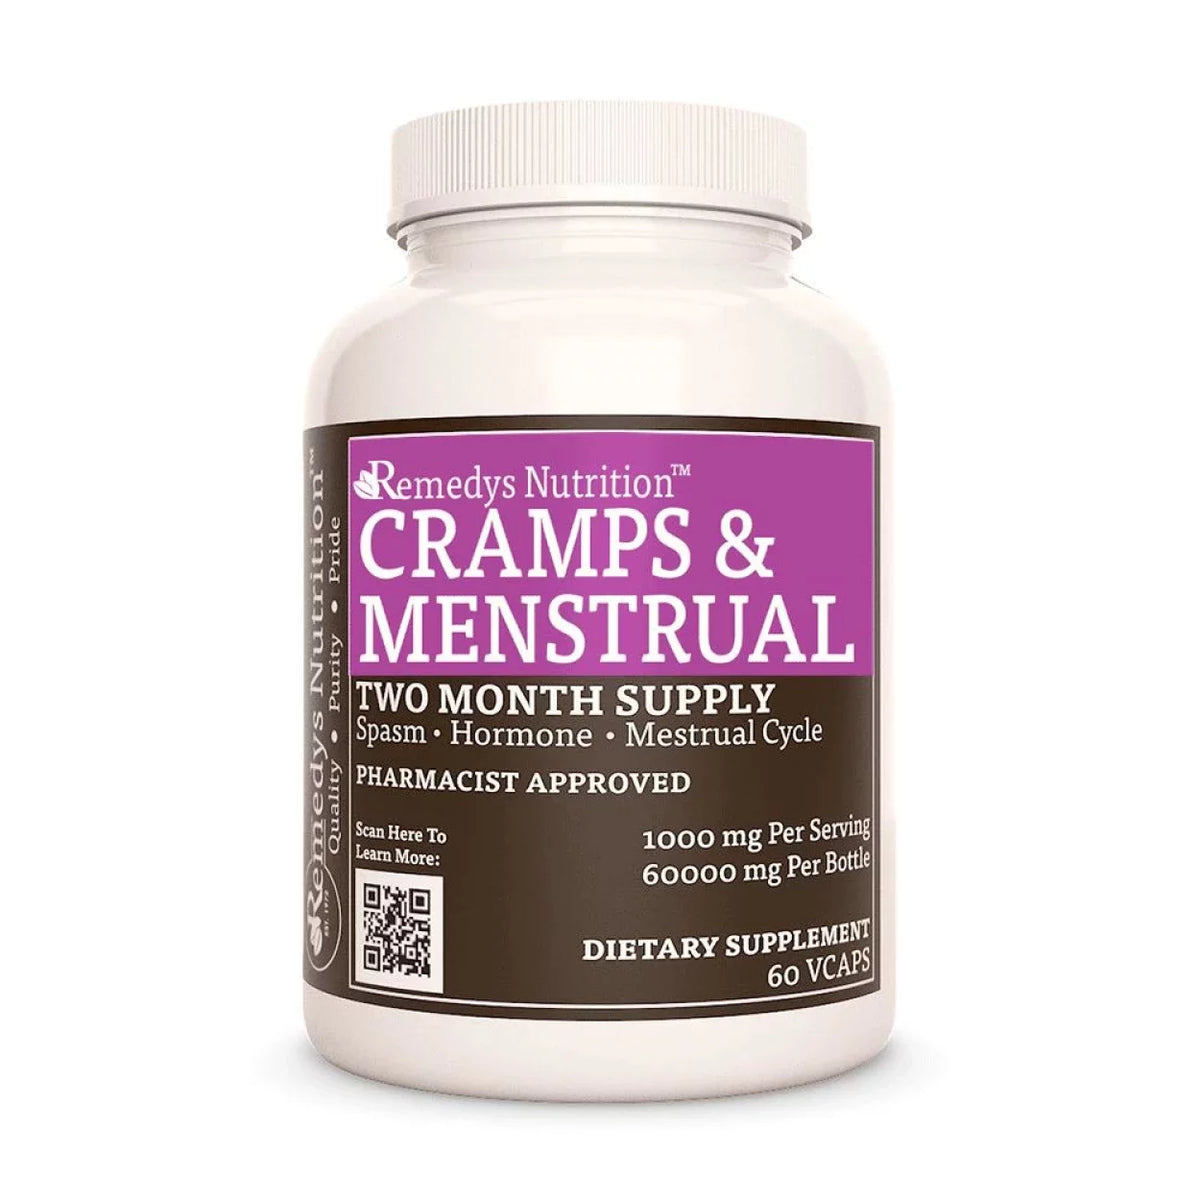 Image of Remedy's Nutrition® Cramps & Menstrual™ Support Capsules Proprietary Herbal Supplement front bottle. Made in the USA